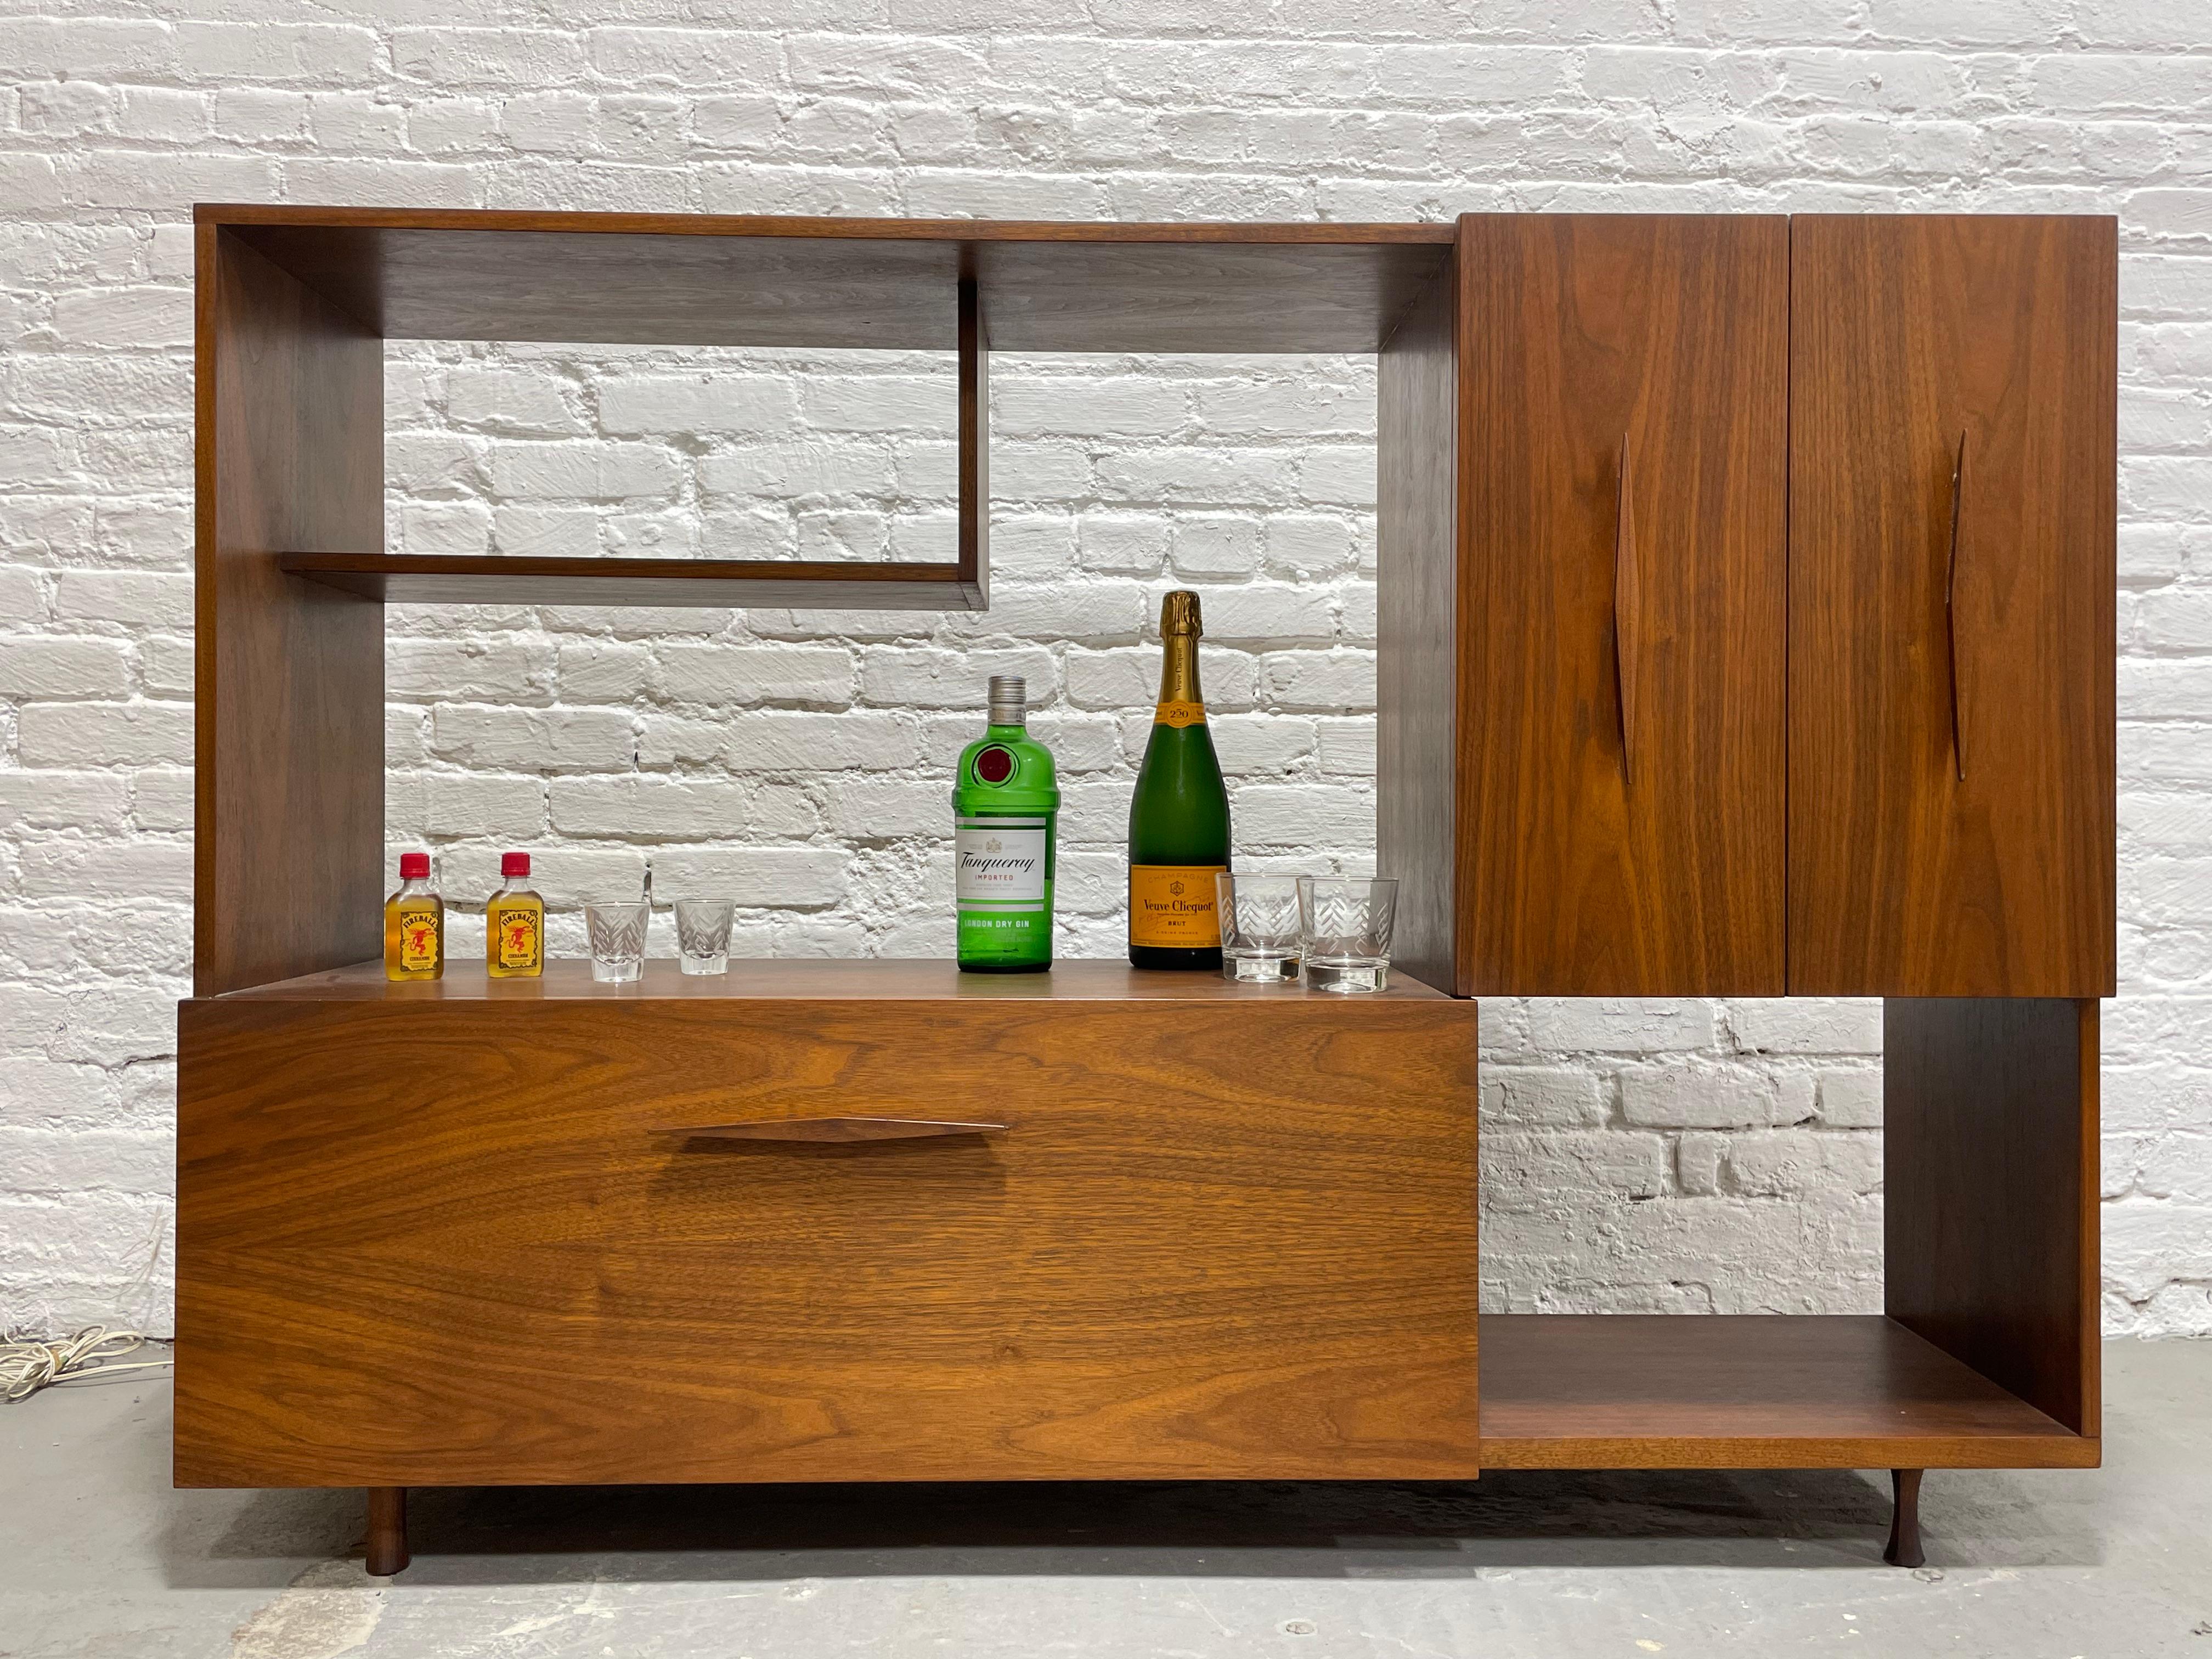 Super Fun Mid Century Modern Walnut Bar / Bookcase / Cabinet, c. 1960's.   This stately bar offers plenty of room for your liquor collection, glasses and anything else you need for the funkiest bar ever, including an awesome drop down bar with felt